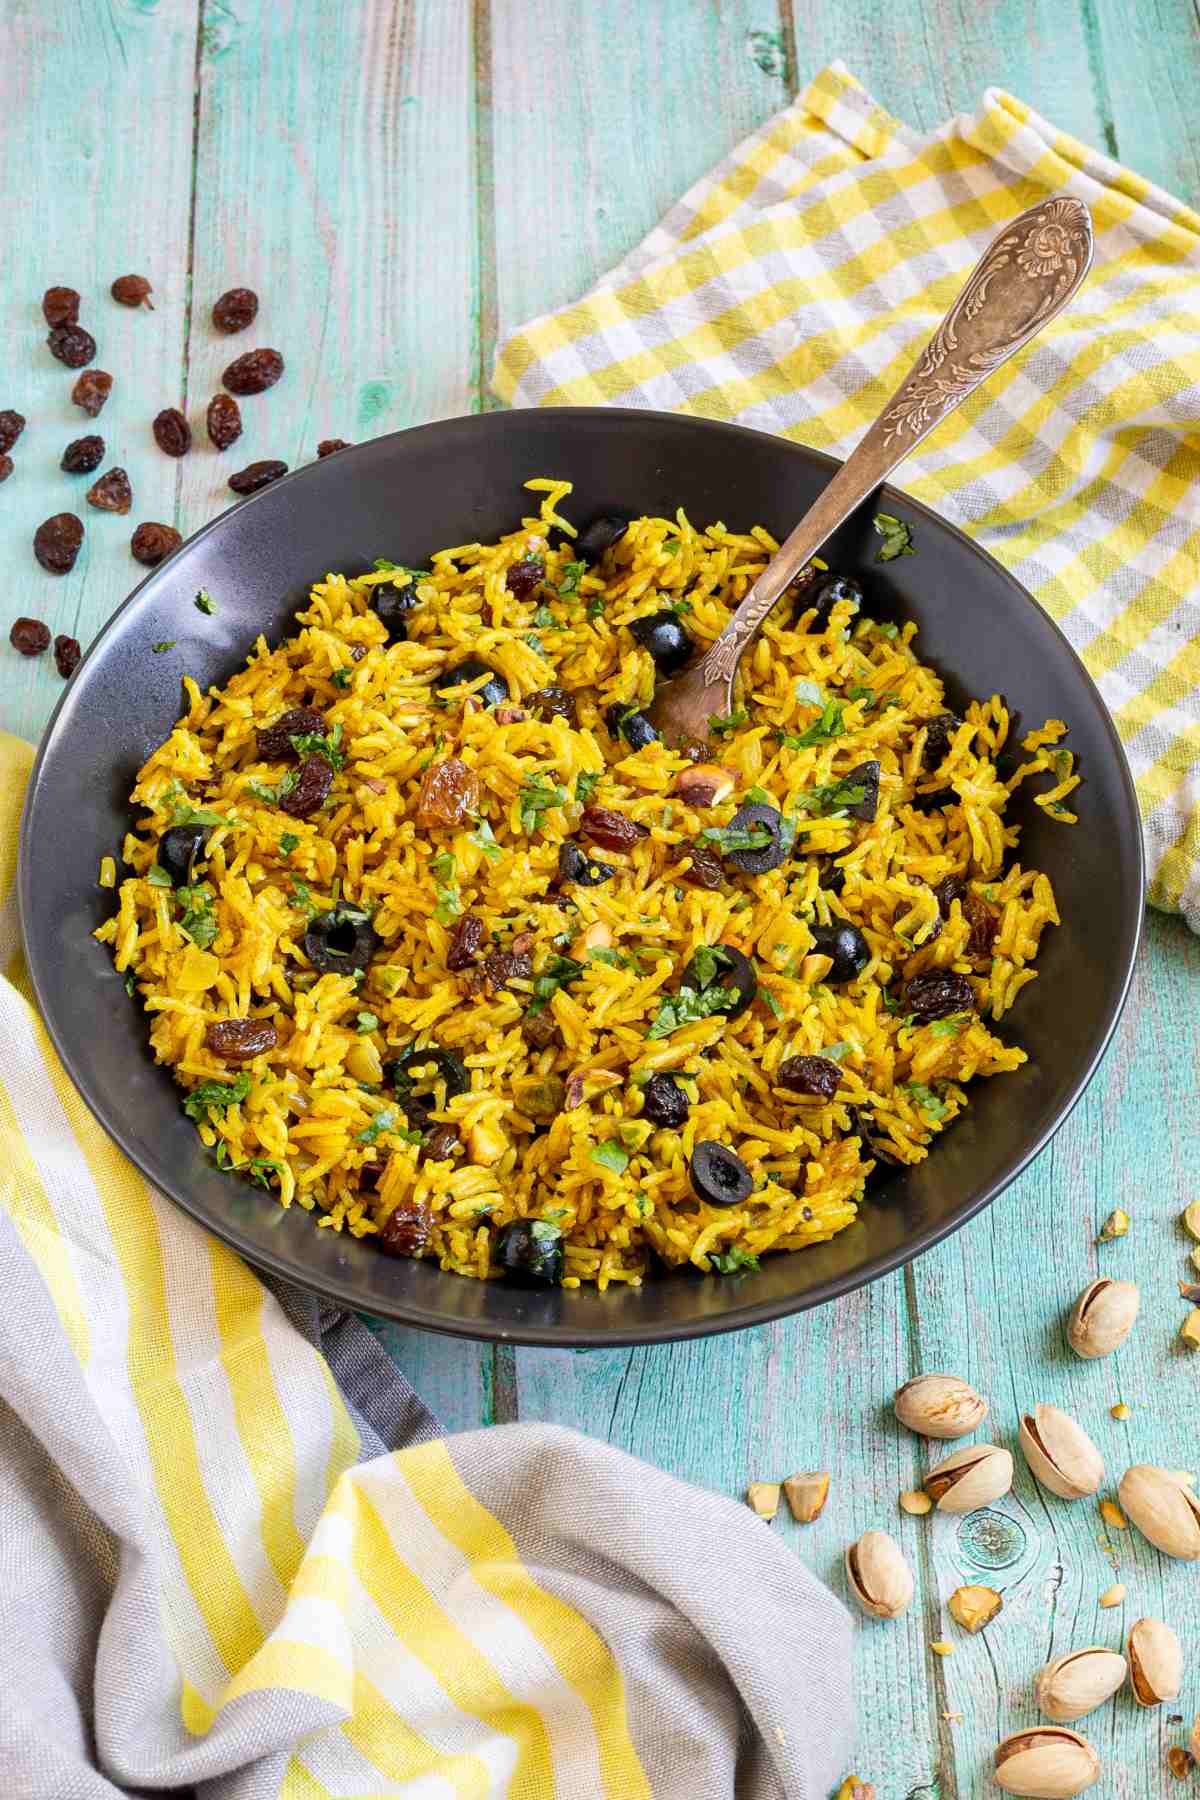 Yellow rice with raisins and pistachios and green herbs in a black bowl. More dry ingredients are scattered around it.